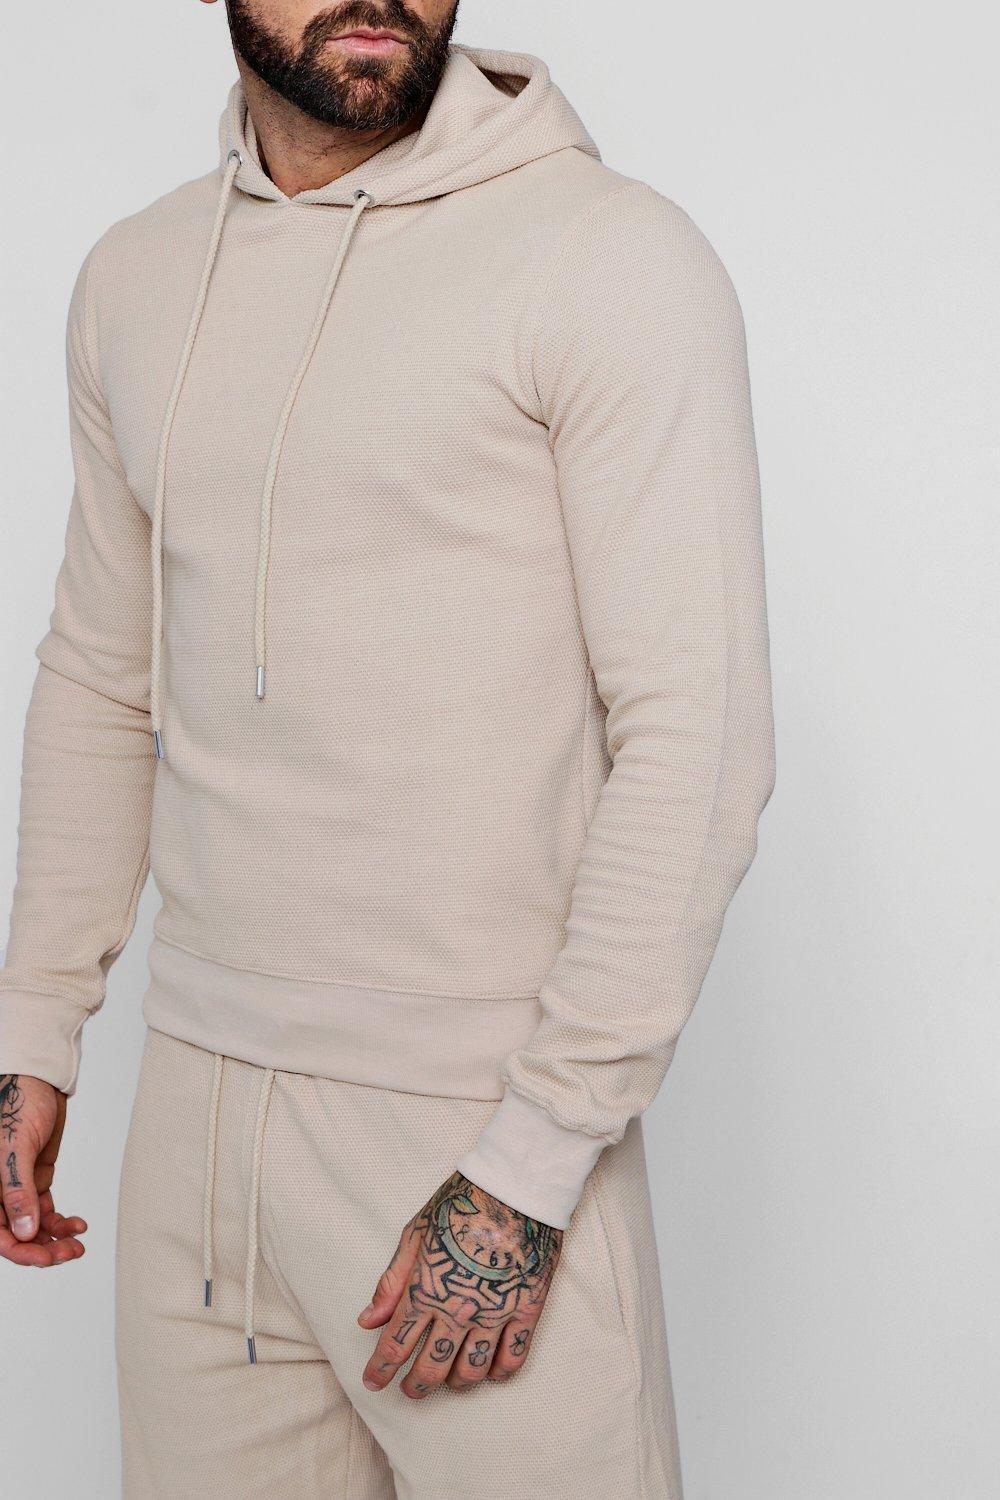 BoohooMAN Pique Oth Hoodie & Short Tracksuit in Natural for Men - Lyst